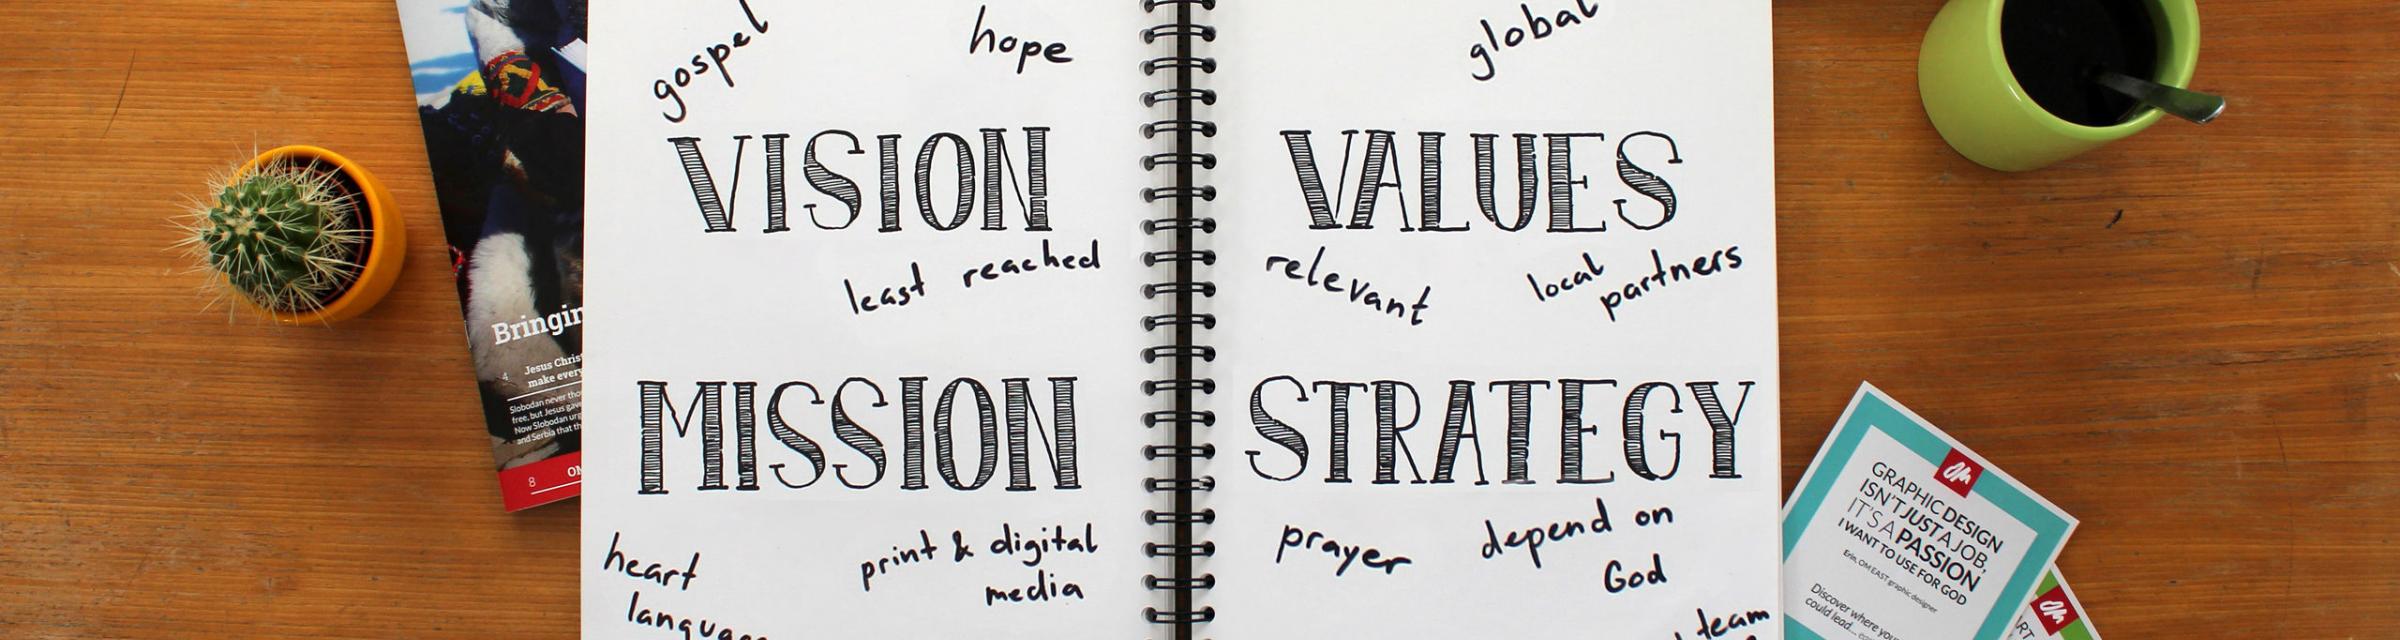 Open notebook with words "Vision, values, mission, strategy"